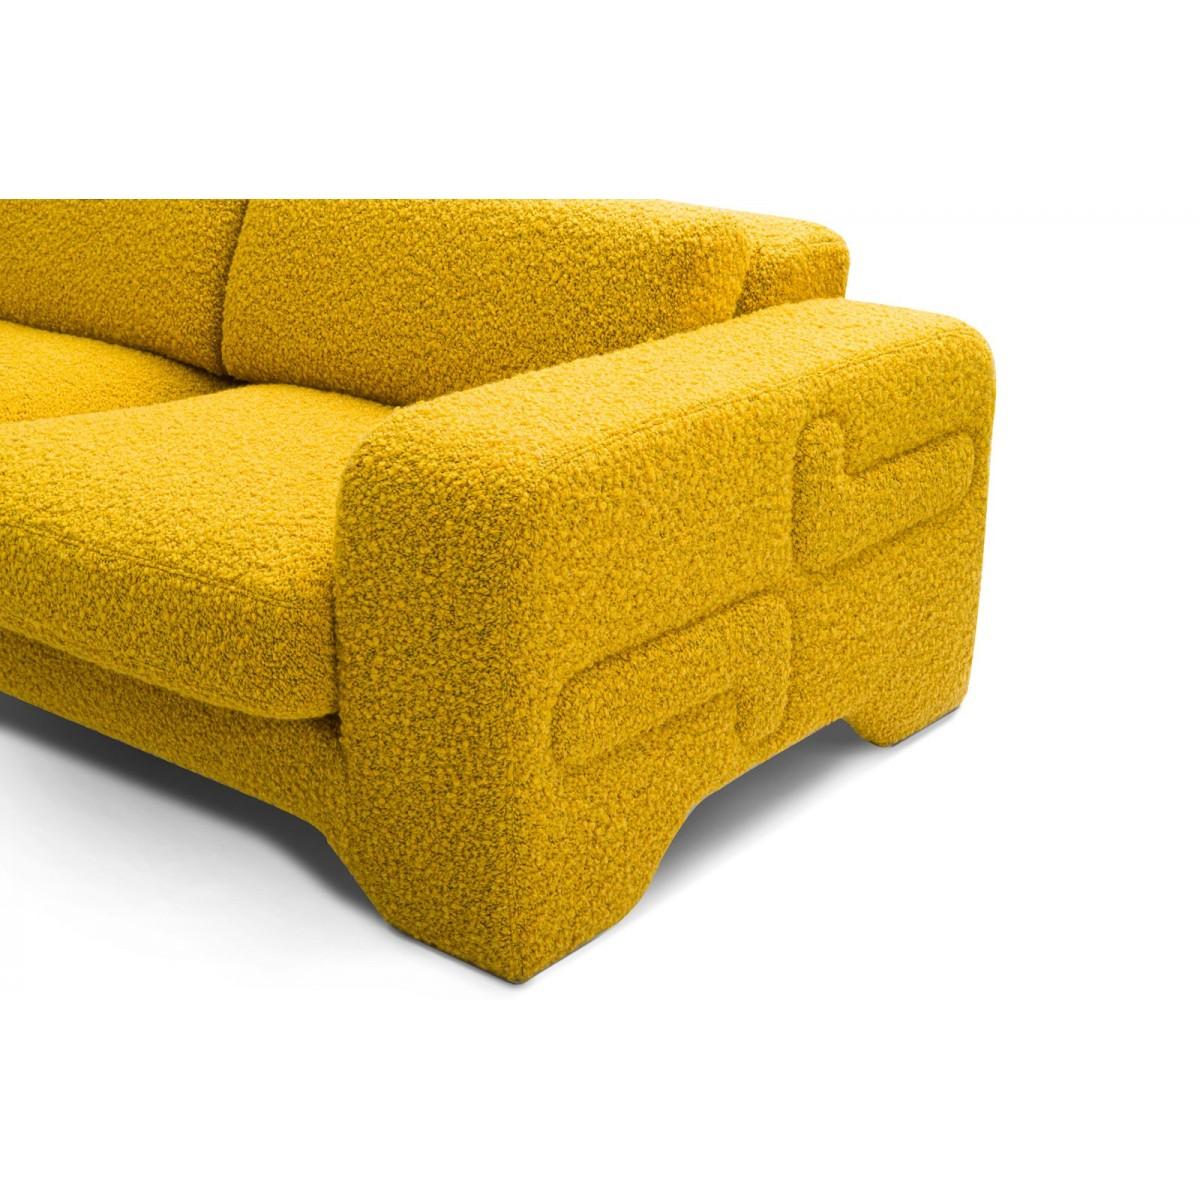 Contemporary Popus Editions Giovanna 3 Seater Sofa in Amber Athena Loop Yarn Fabric For Sale